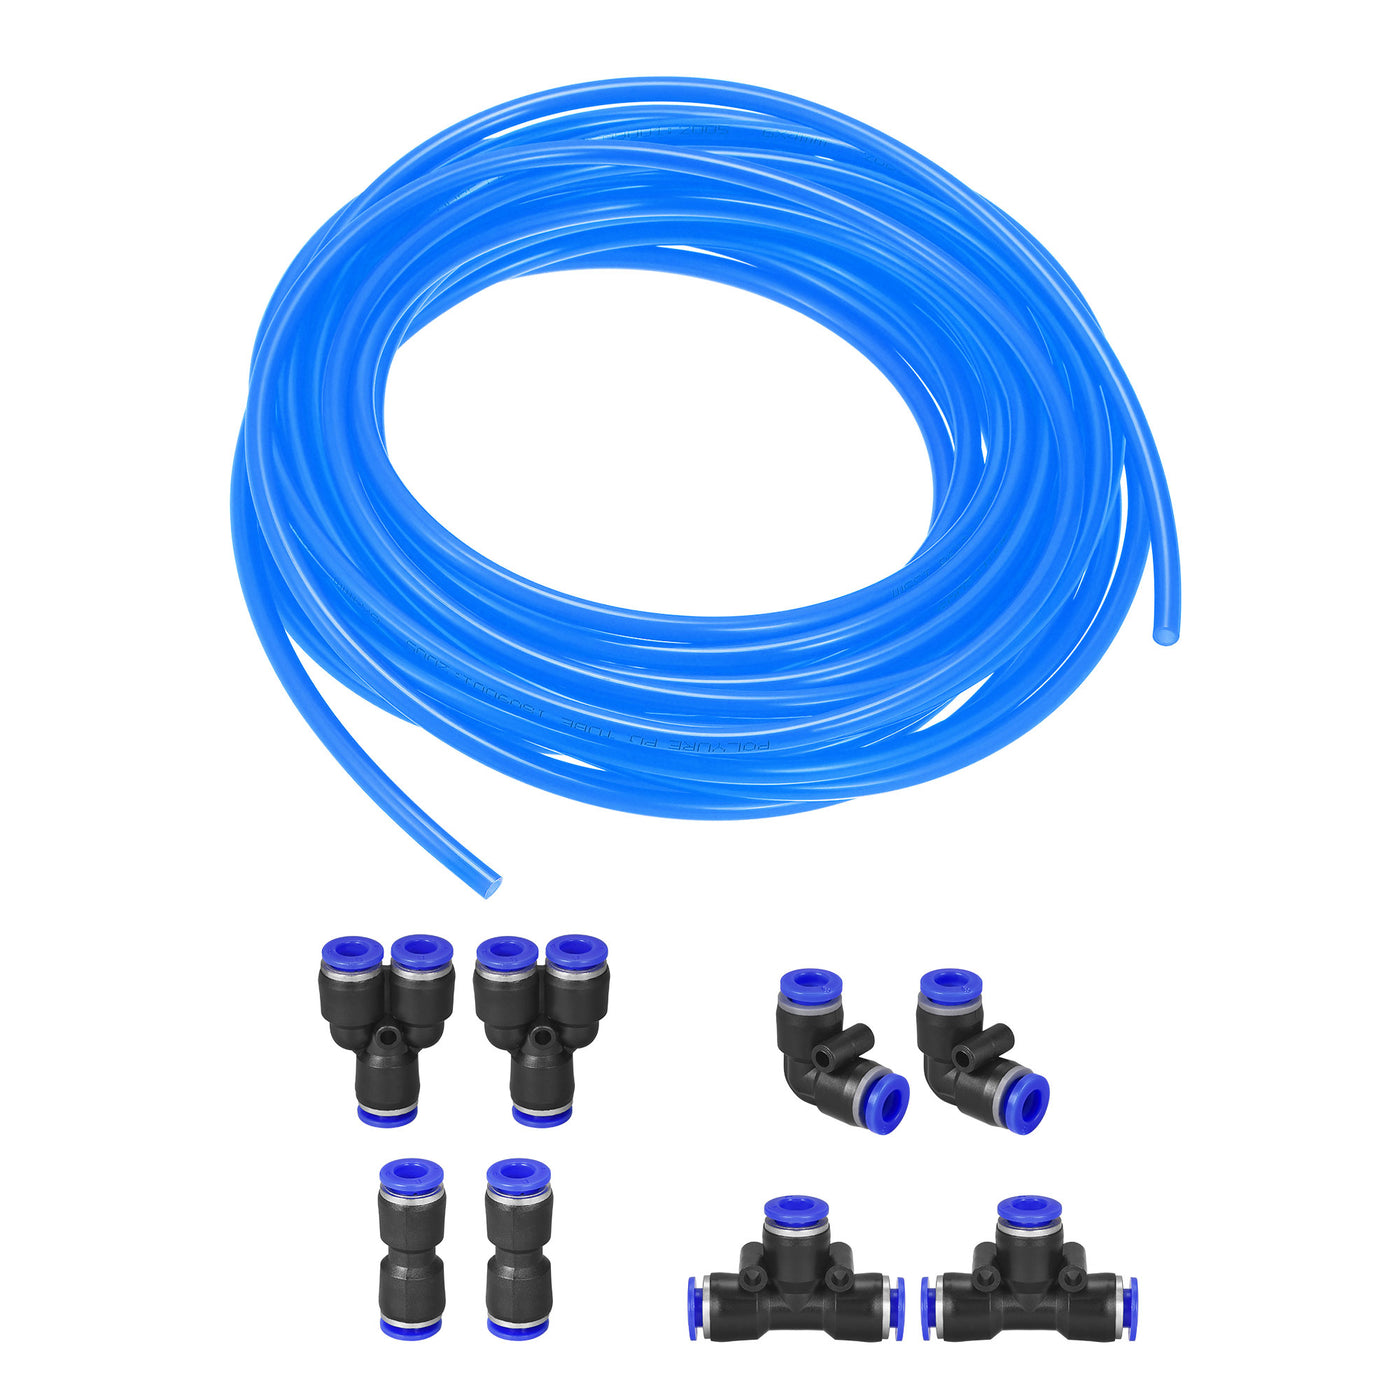 uxcell Uxcell Pneumatic Air Hose Tubing Air Compressor Tube 4mm/0.16''ID x 6mm/0.23''OD x 10m/32.8Ft Polyurethane Pipe Blue with Connect Fitting Kit